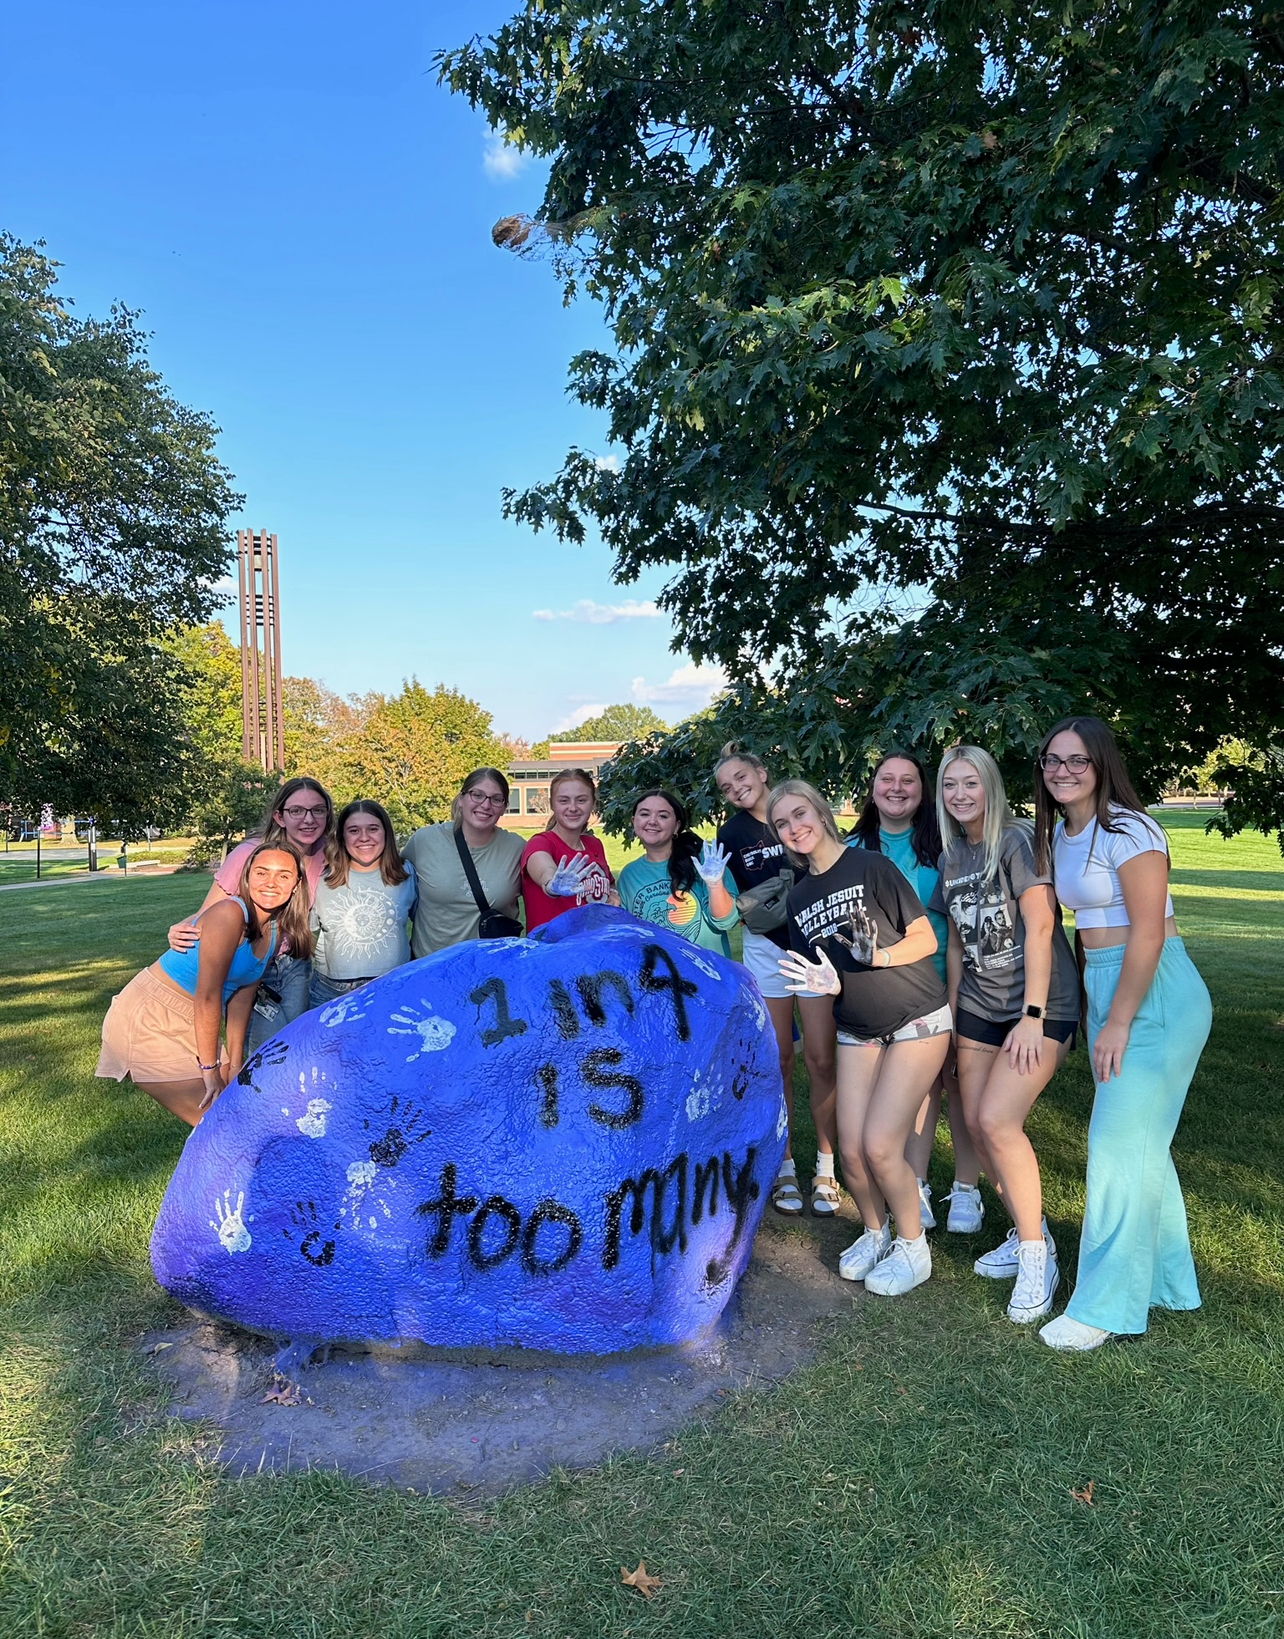 Alpha Chi Omega with the rock they painted